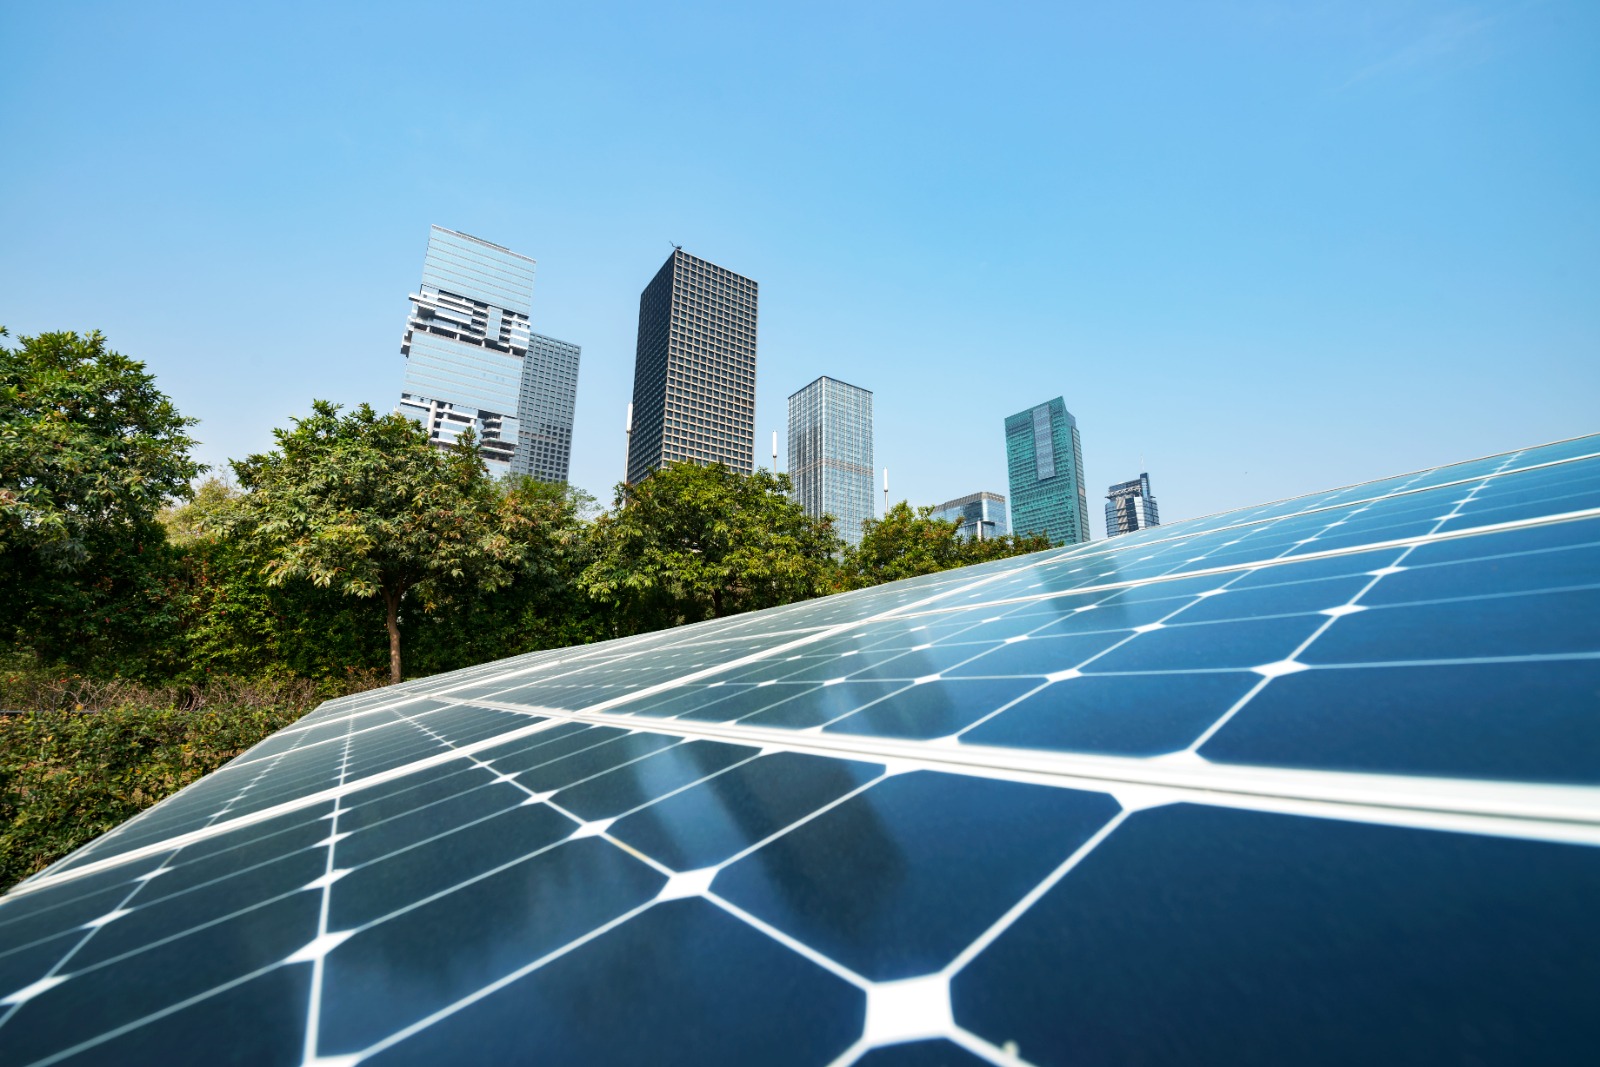 Solar panels in front of green trees and modern buildings. Property landlords are increasingly becoming infrastructure owners themselves, with buildings playing a significant and ever-growing role in energy generation.